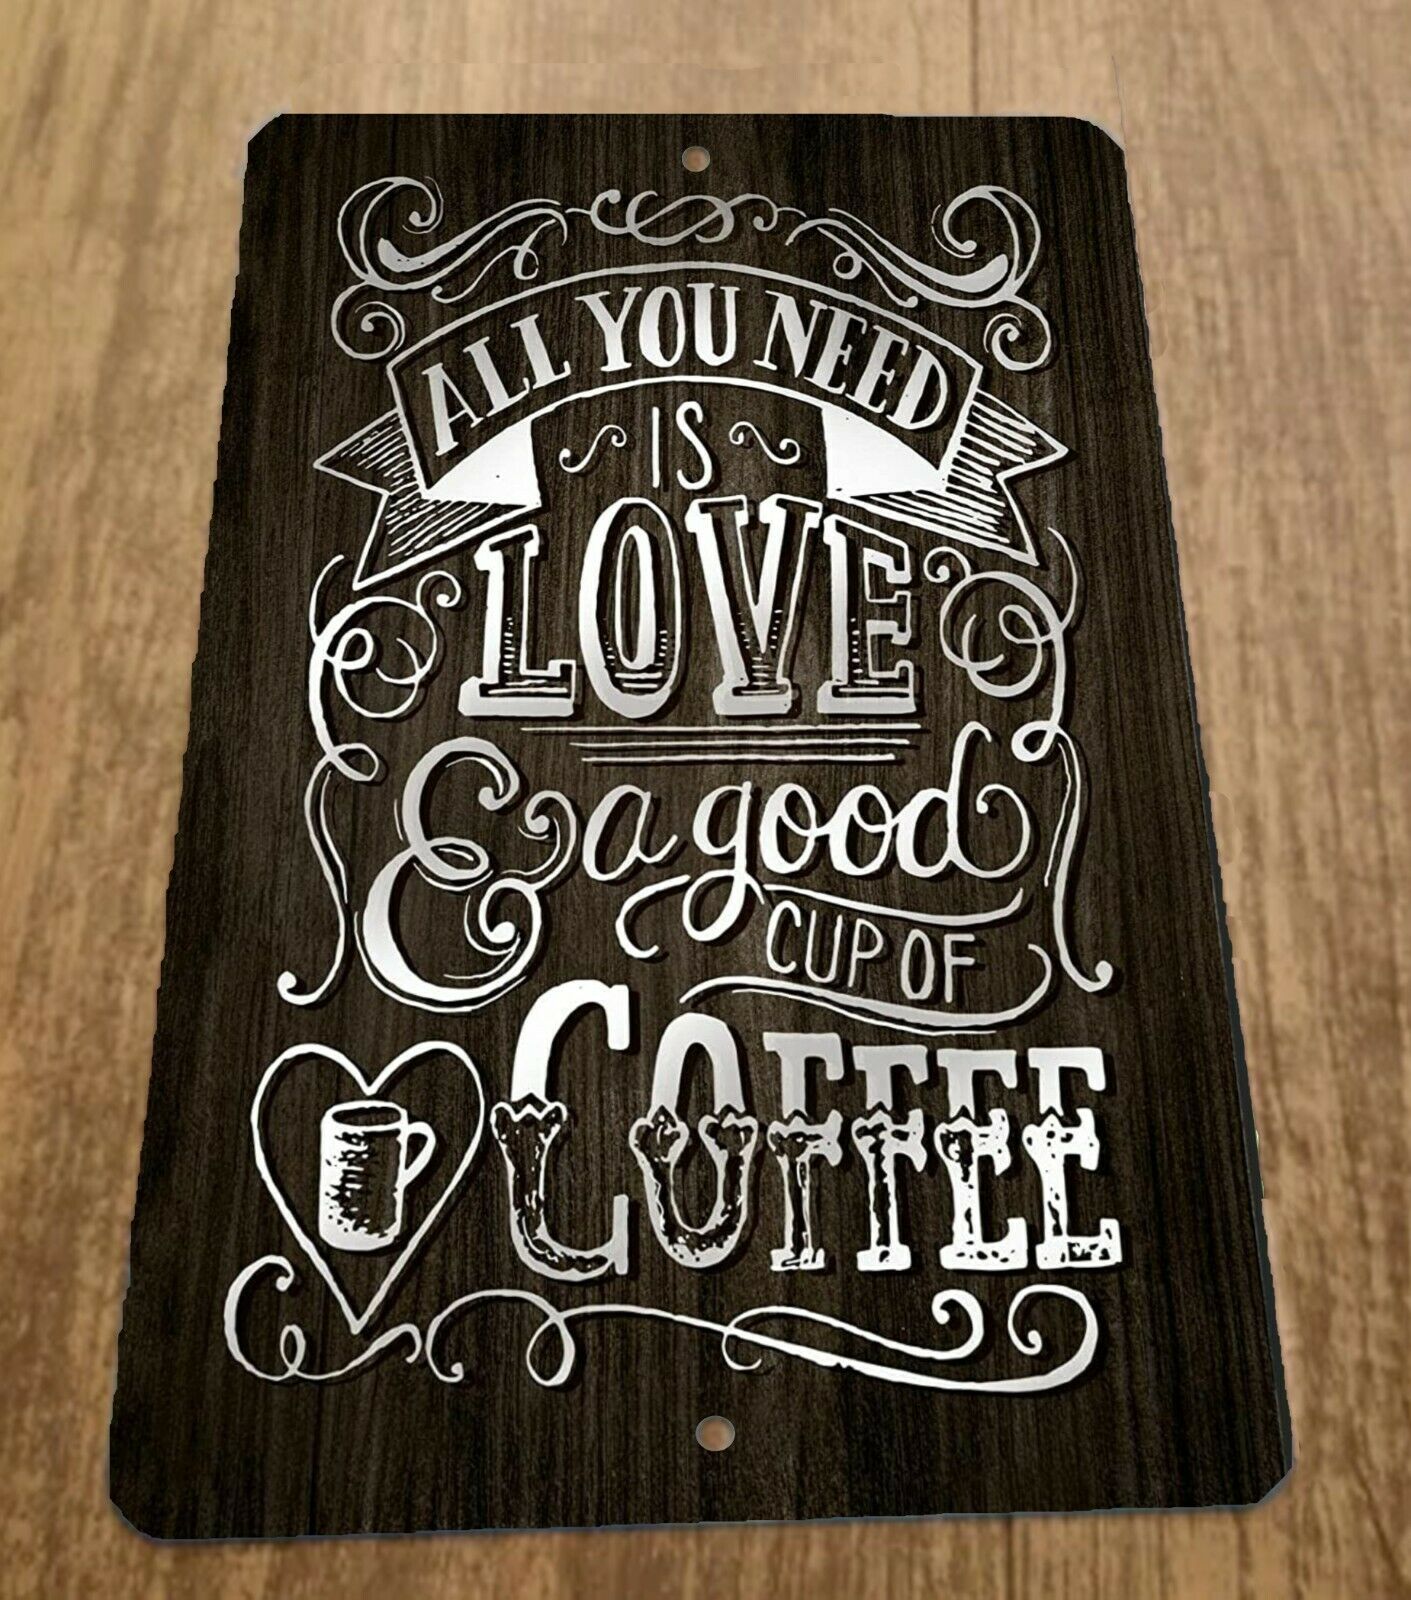 All You Need is Love and a Good Cup of Coffee 8x12 Metal Wall Sign